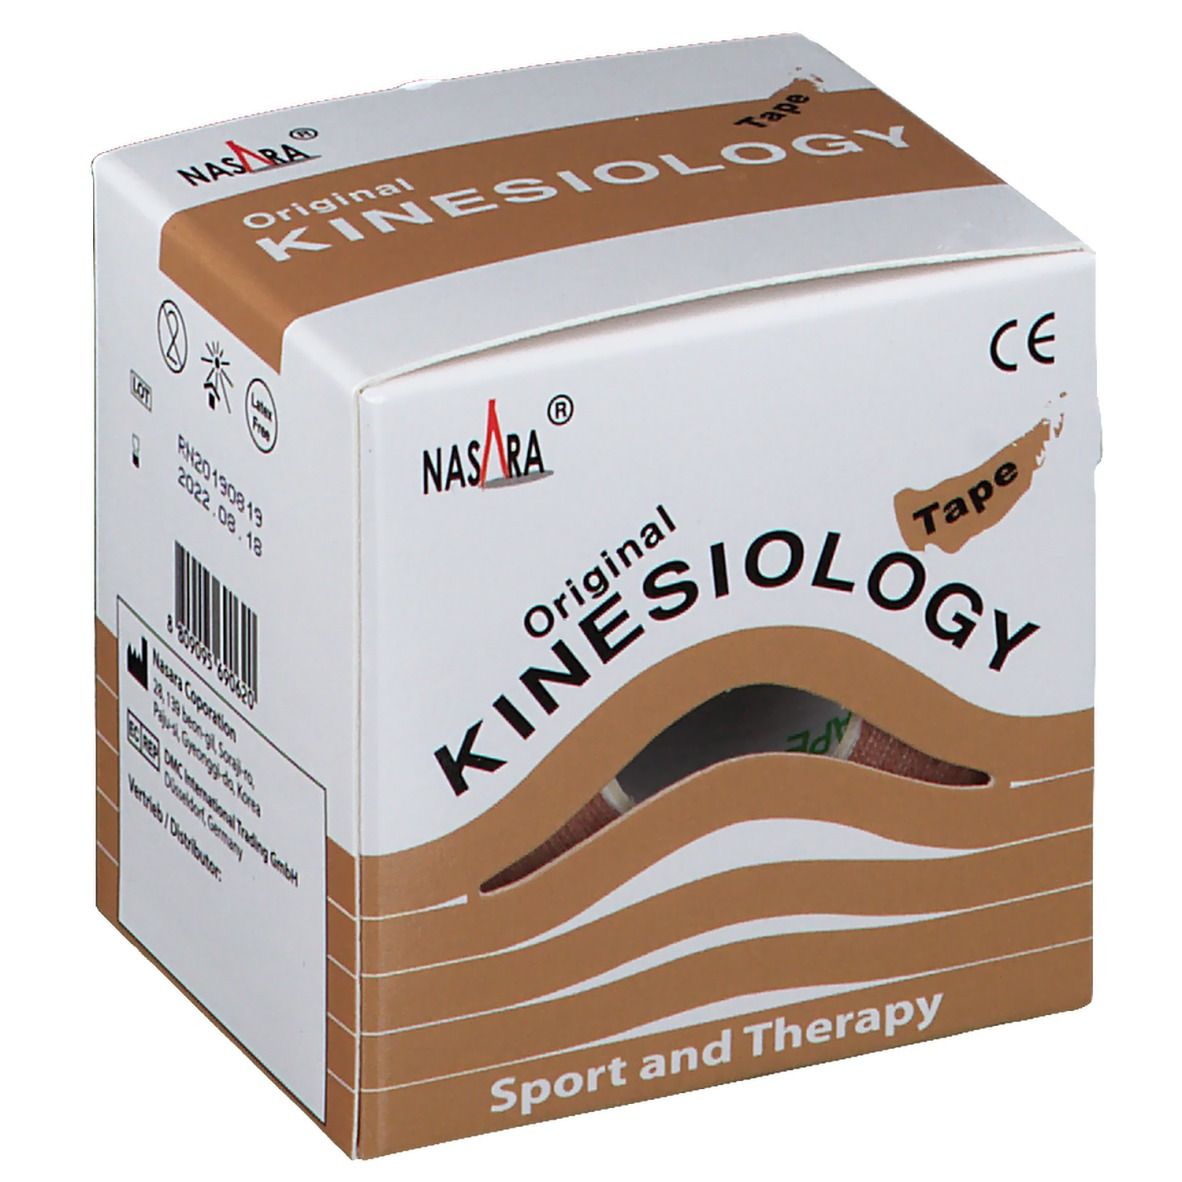 Nasara® Kinesiology-Tape classic 5 cm x 5 m Rolle Beige